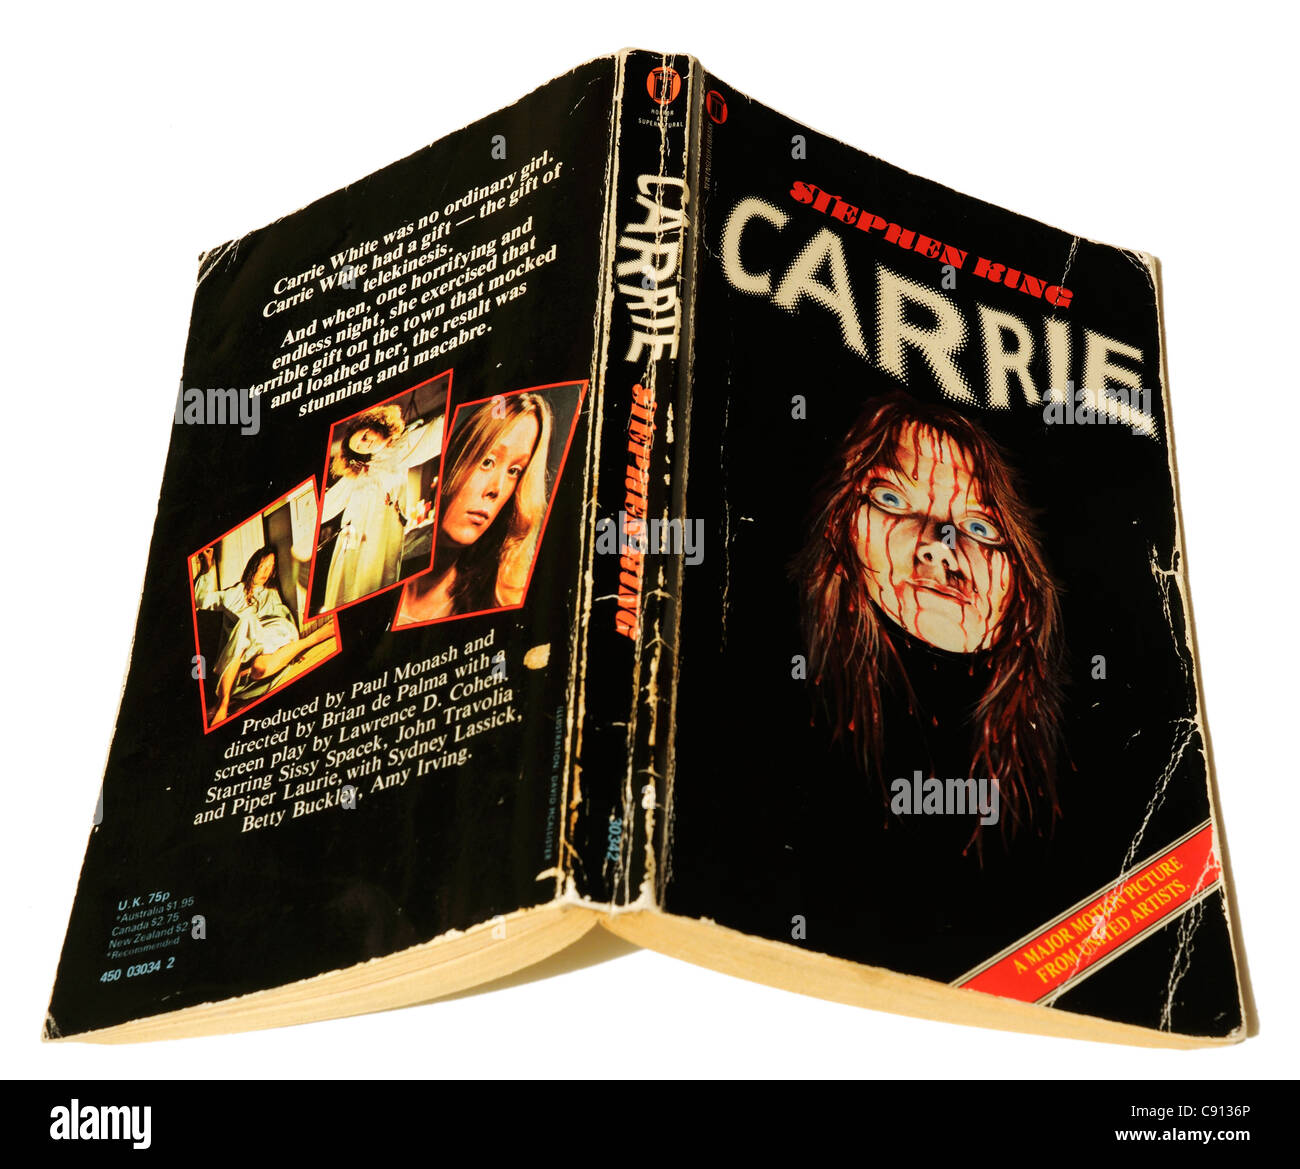 Carrie by Stephen King Stock Photo - Alamy